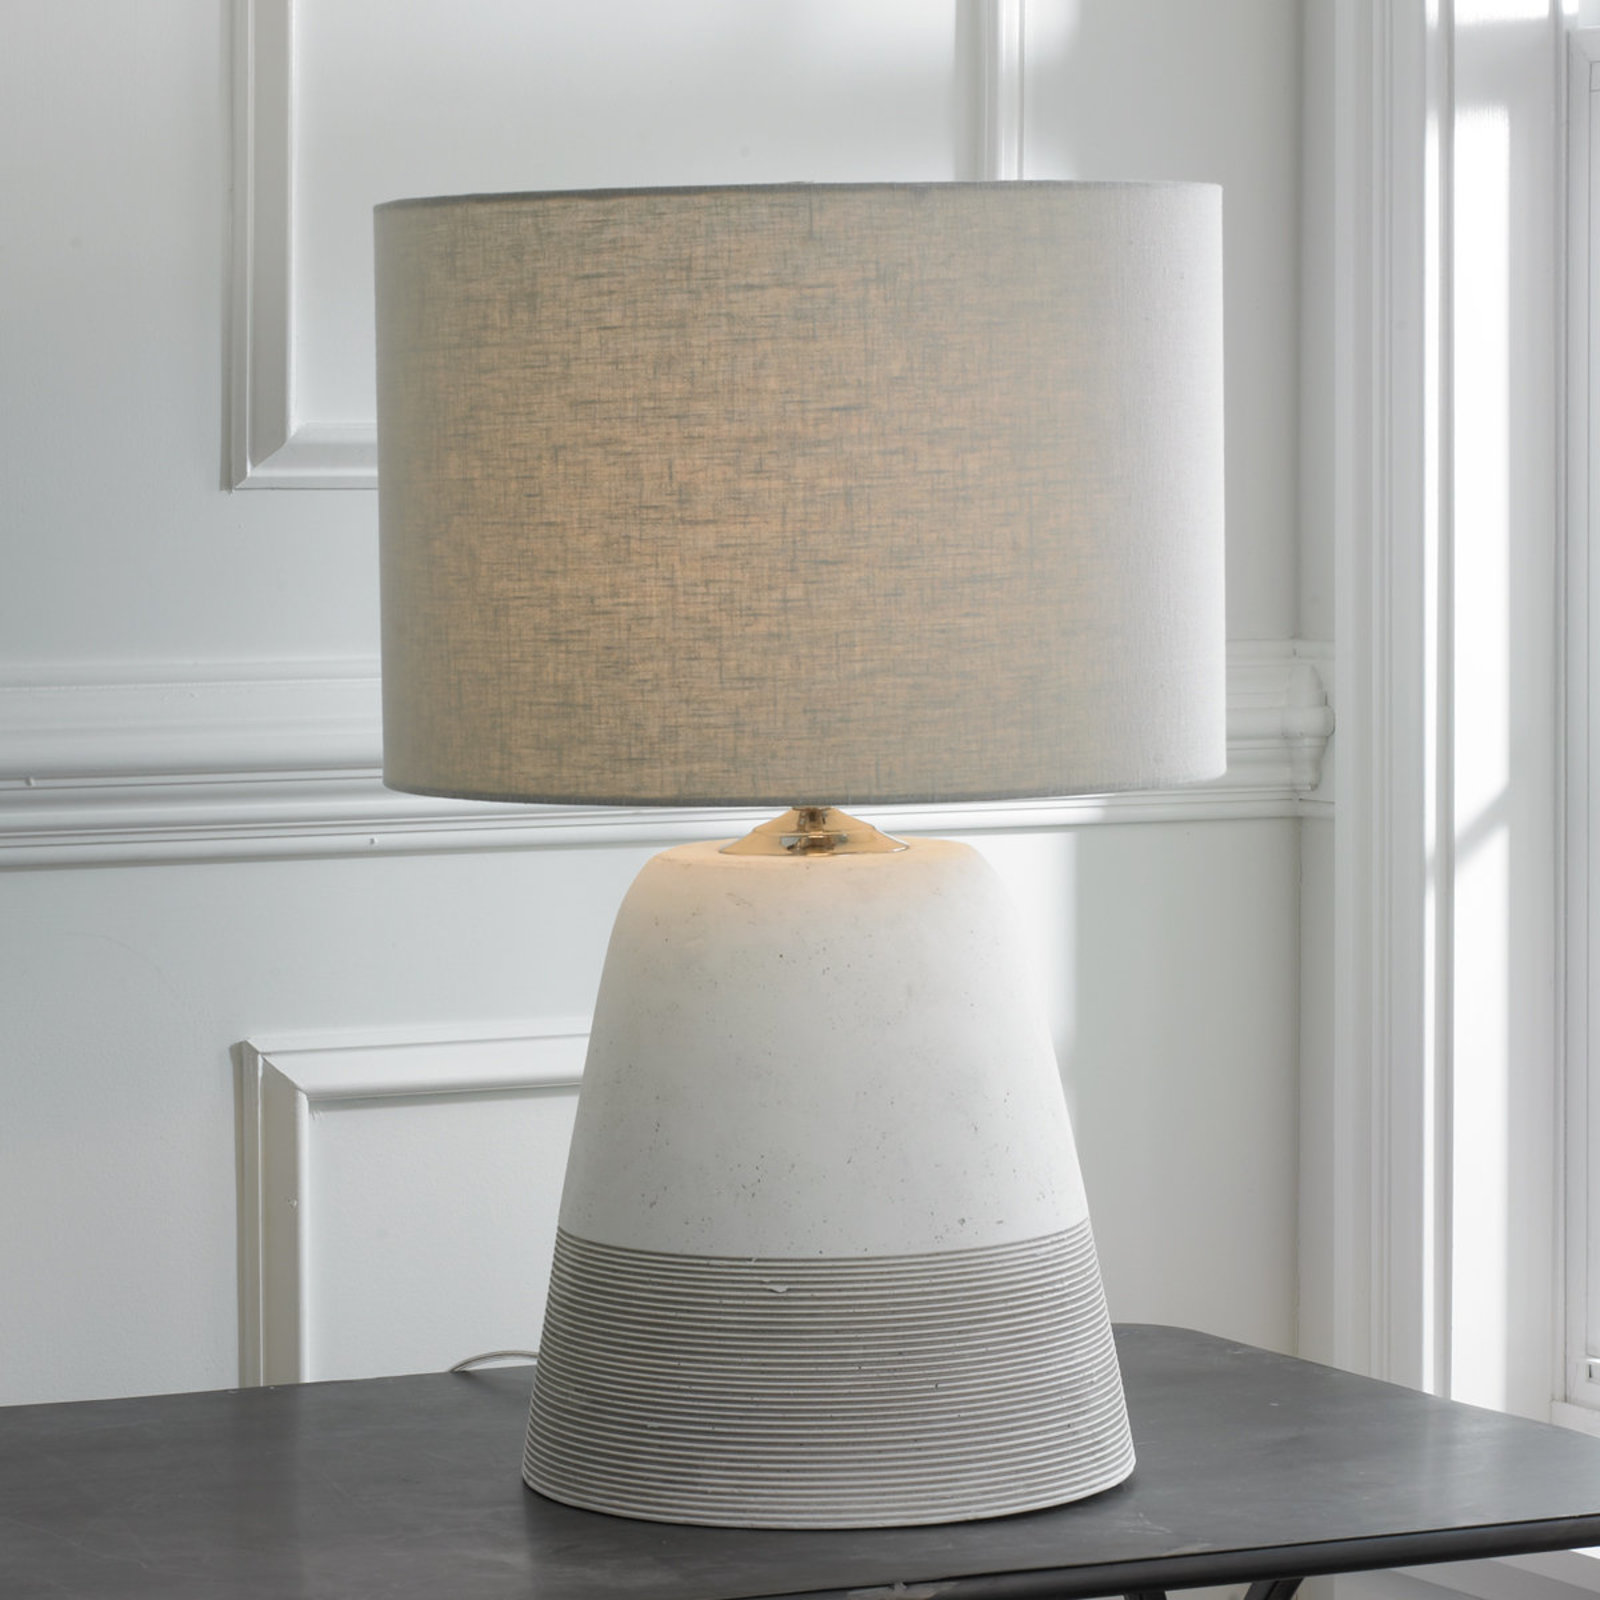 lamp for small table grooved concrete table lamp - small light_gray ZQUXLIZ